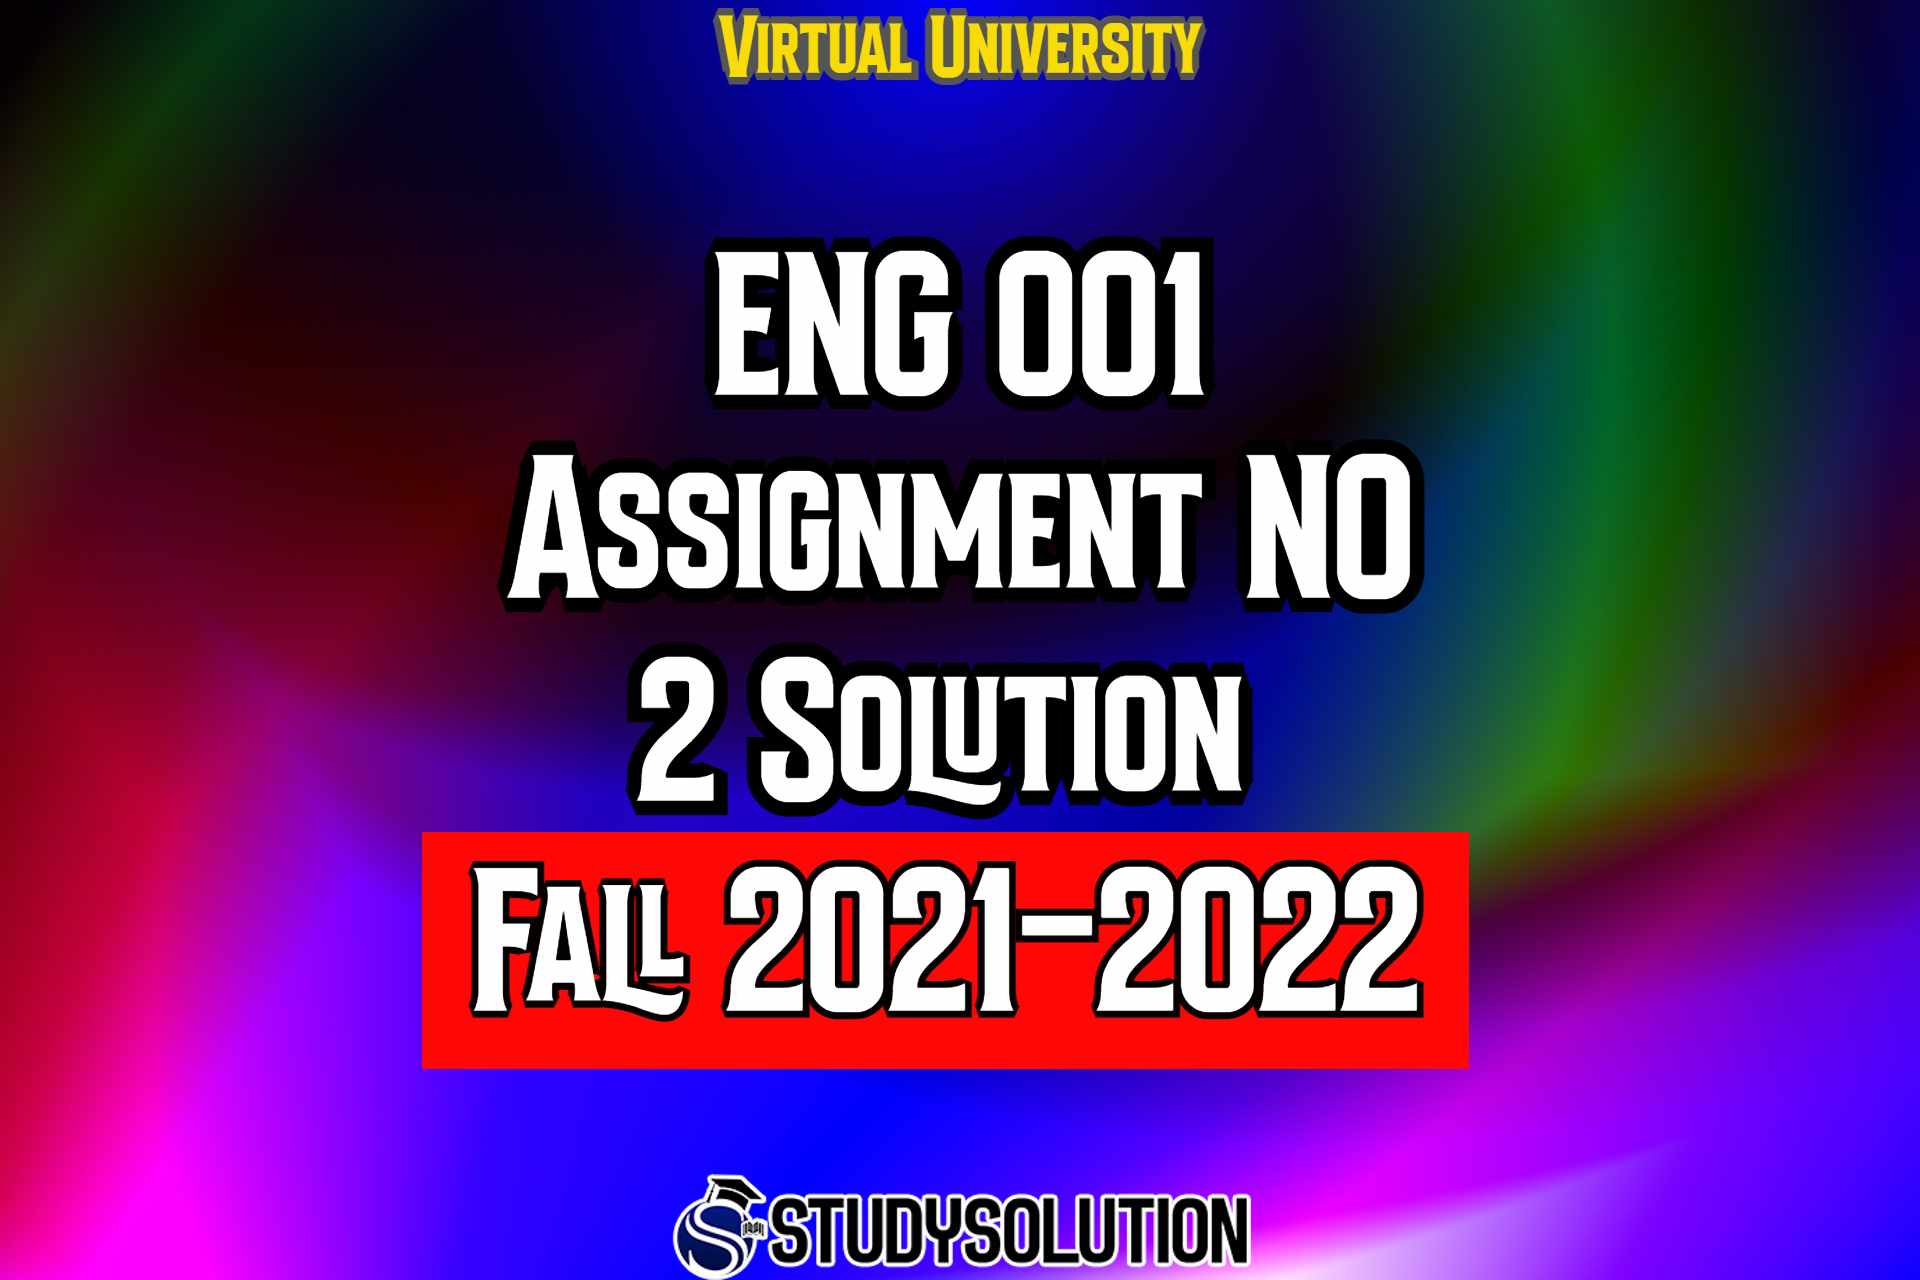 ENG001 Assignment No 2 Solution Fall 2022